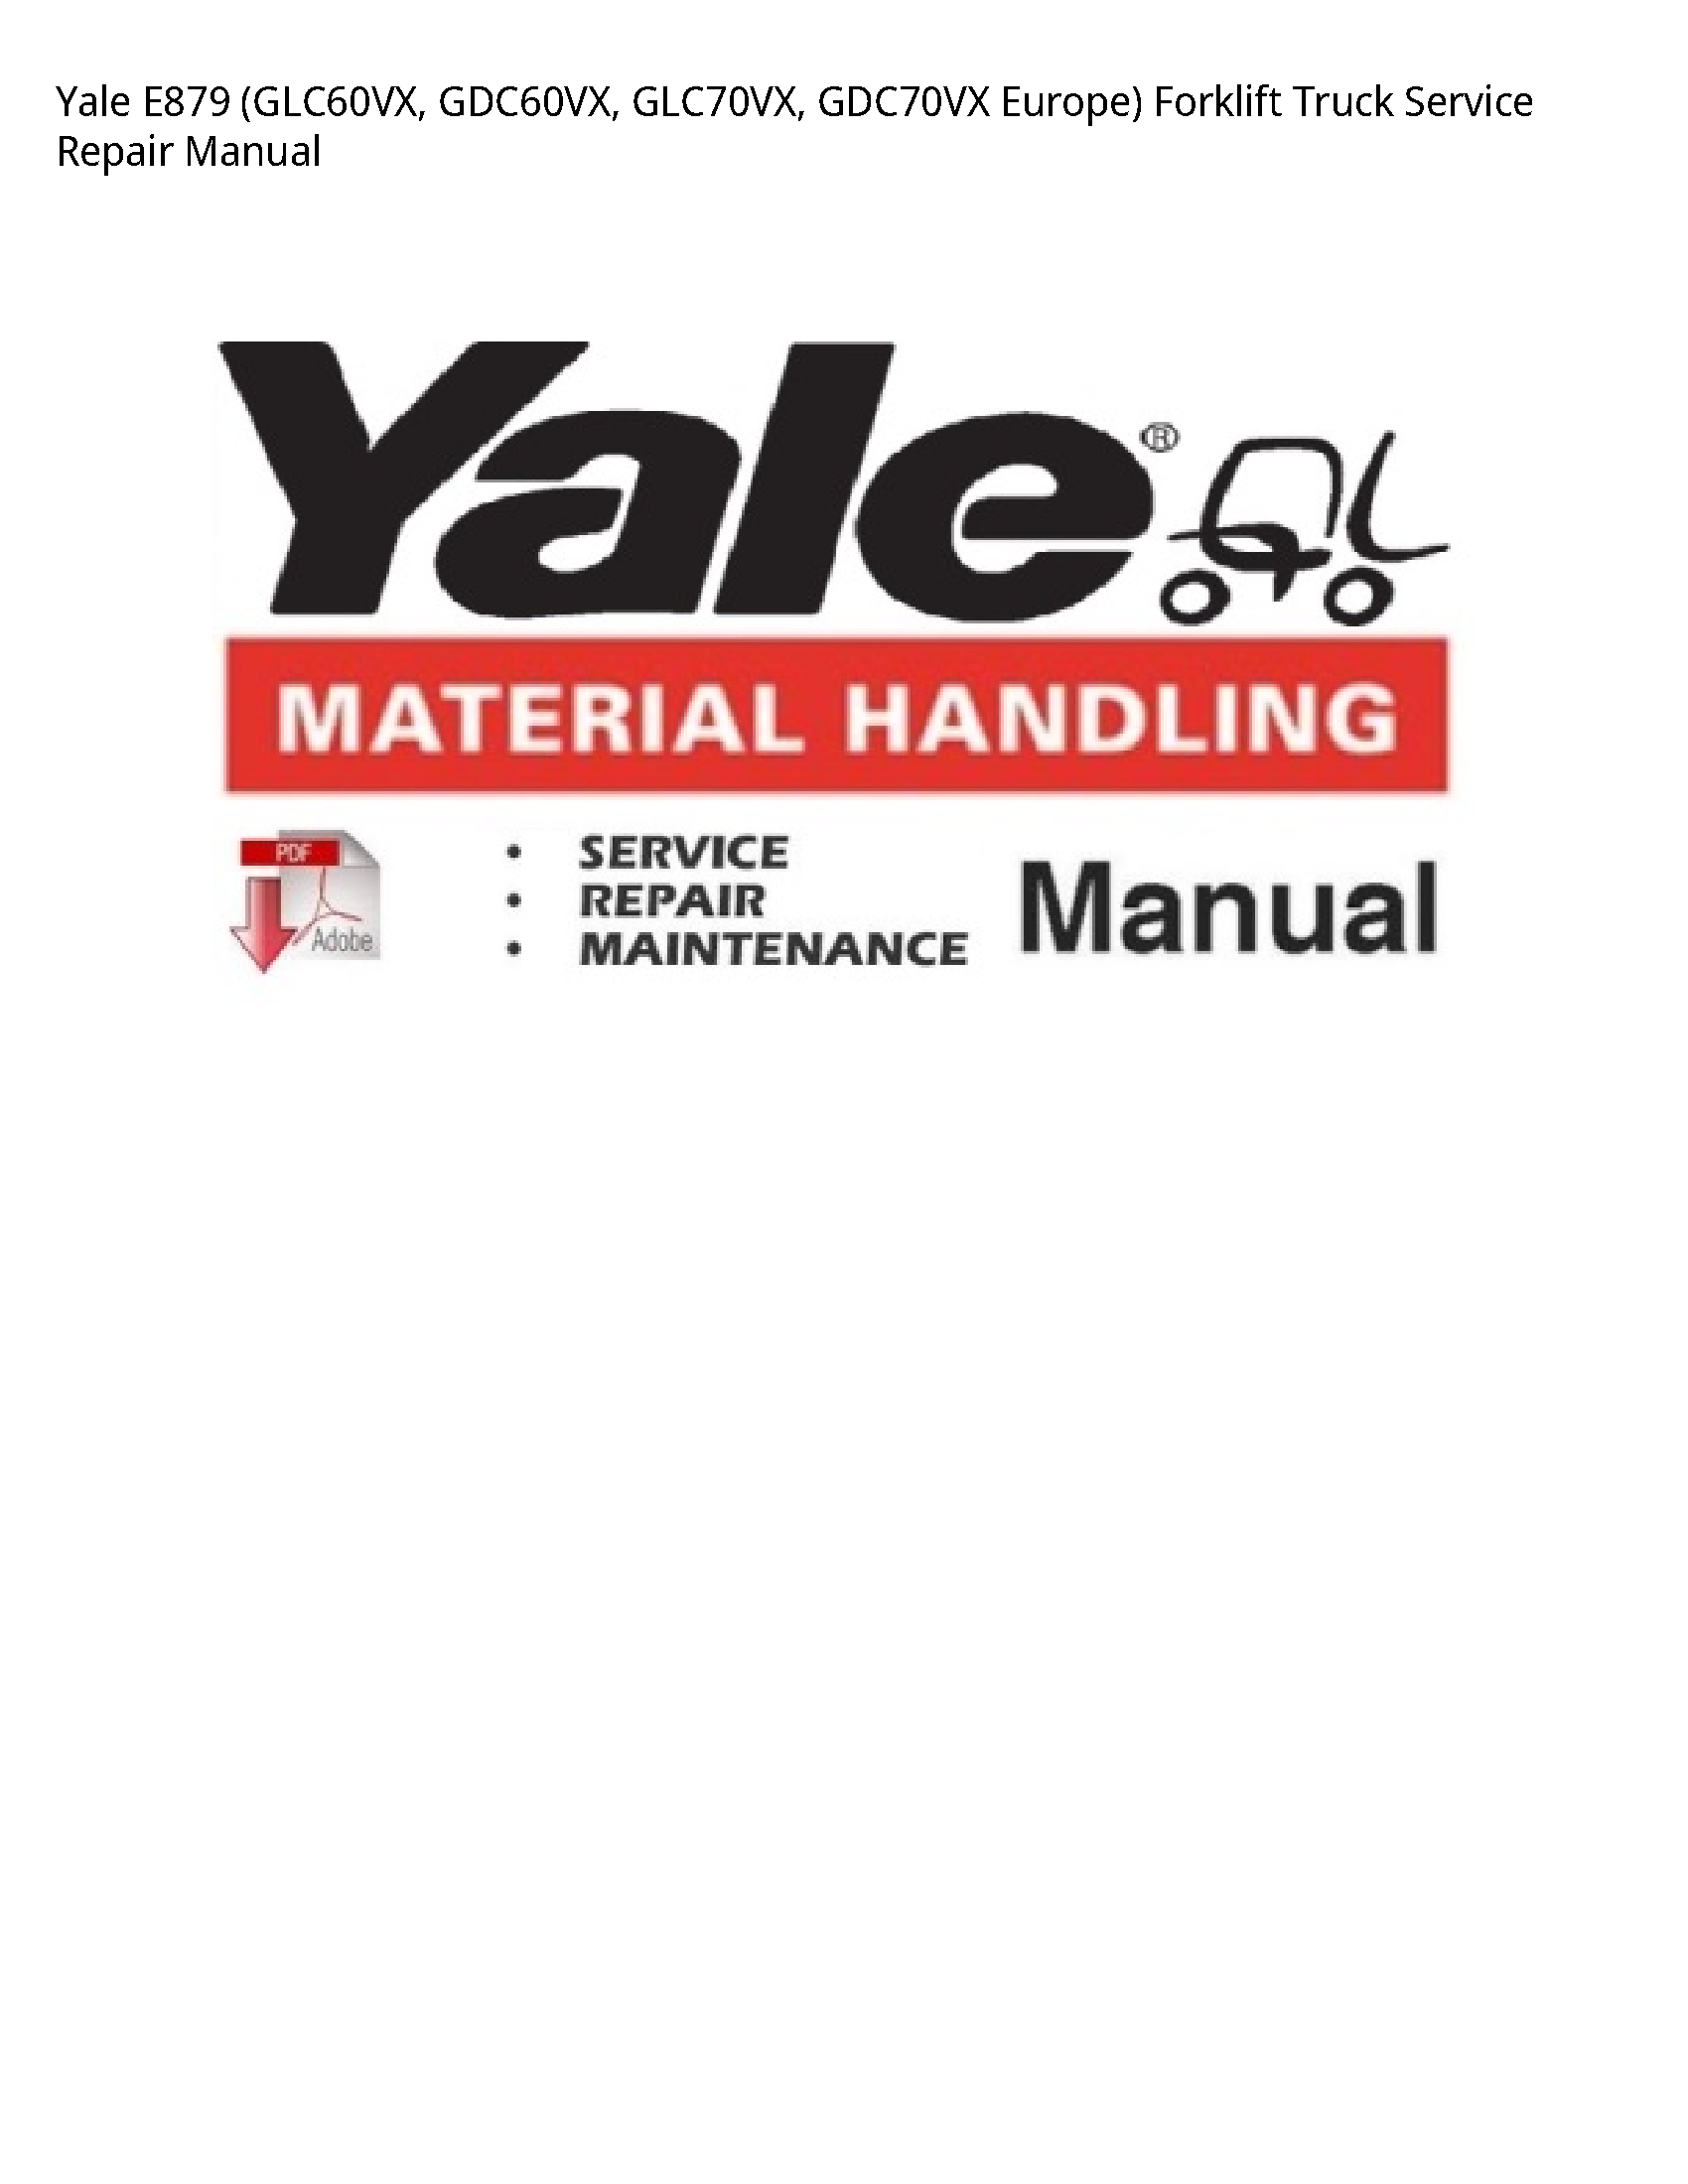 Yale E879 Europe) Forklift Truck manual